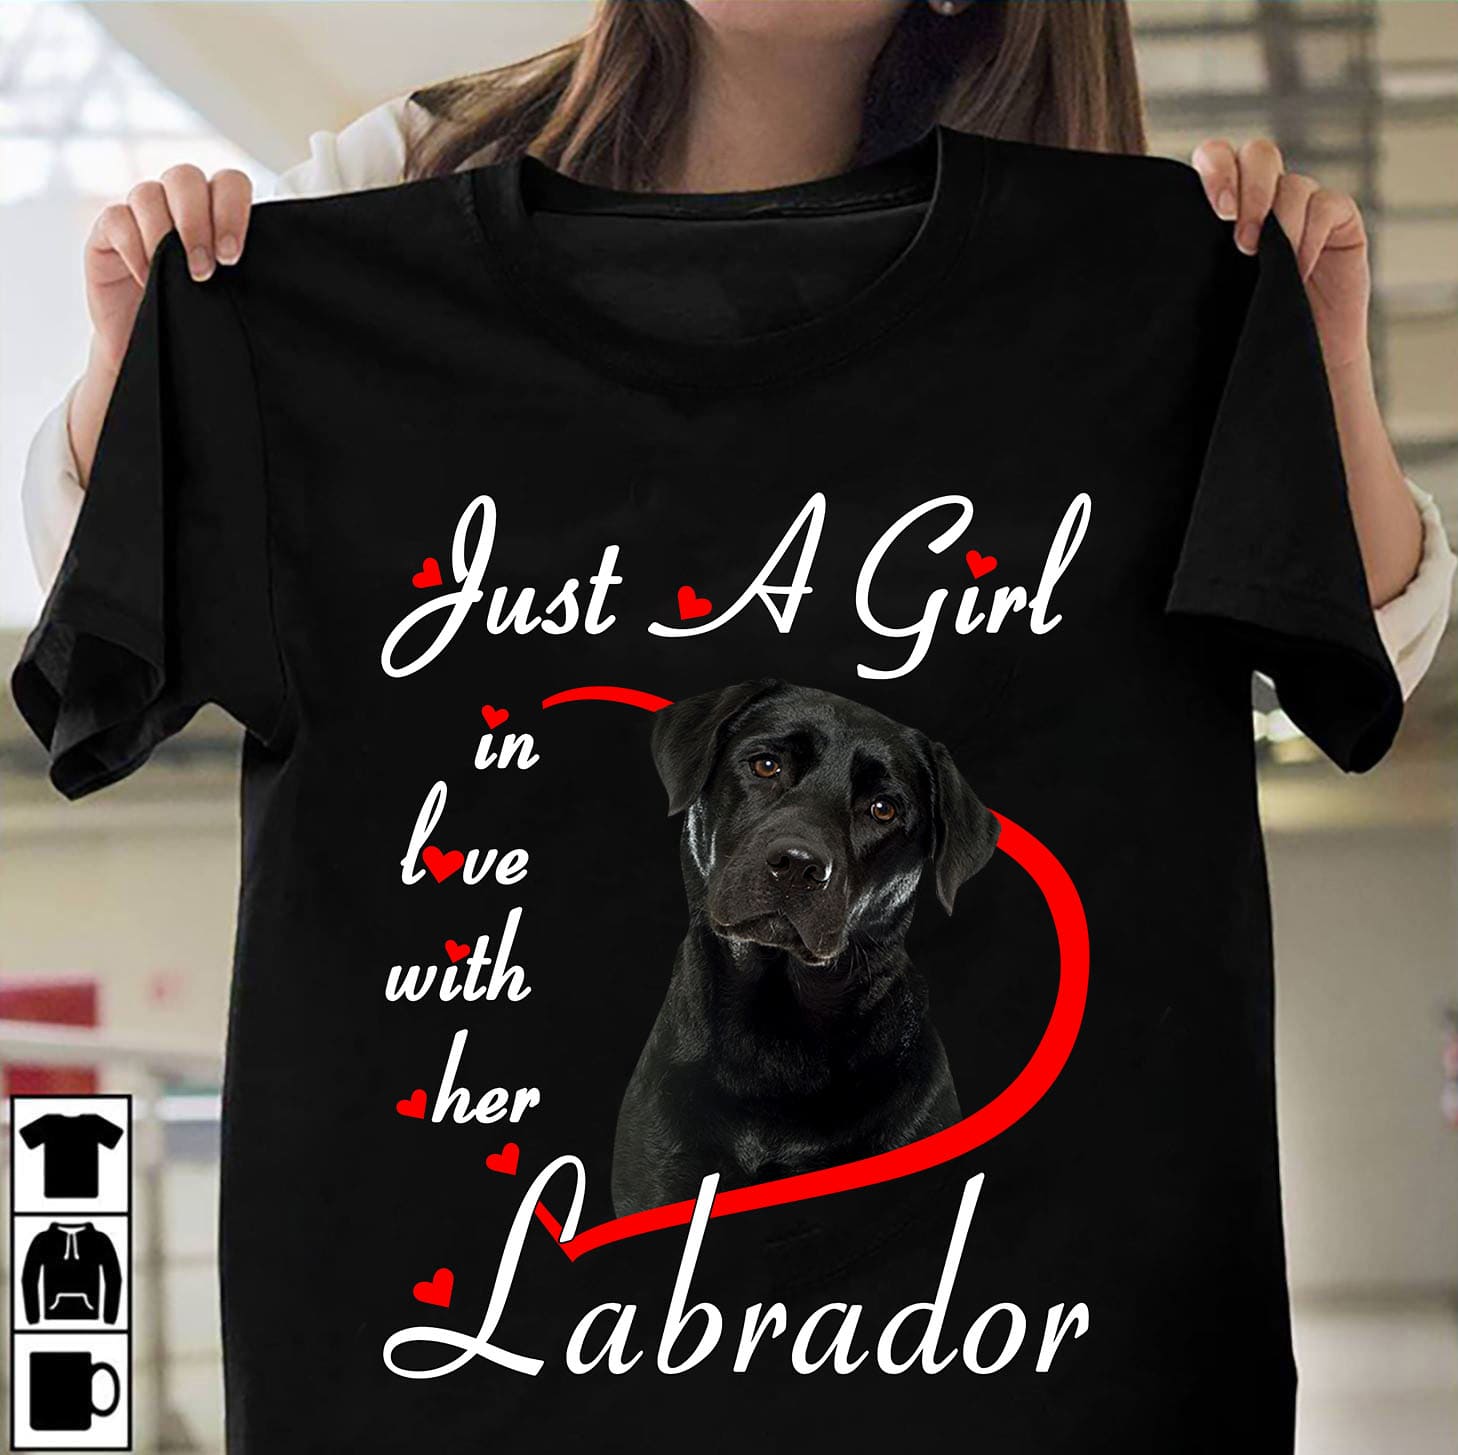 Just a girl in love with her Labrador - Black labrador dog, girl loves dogs